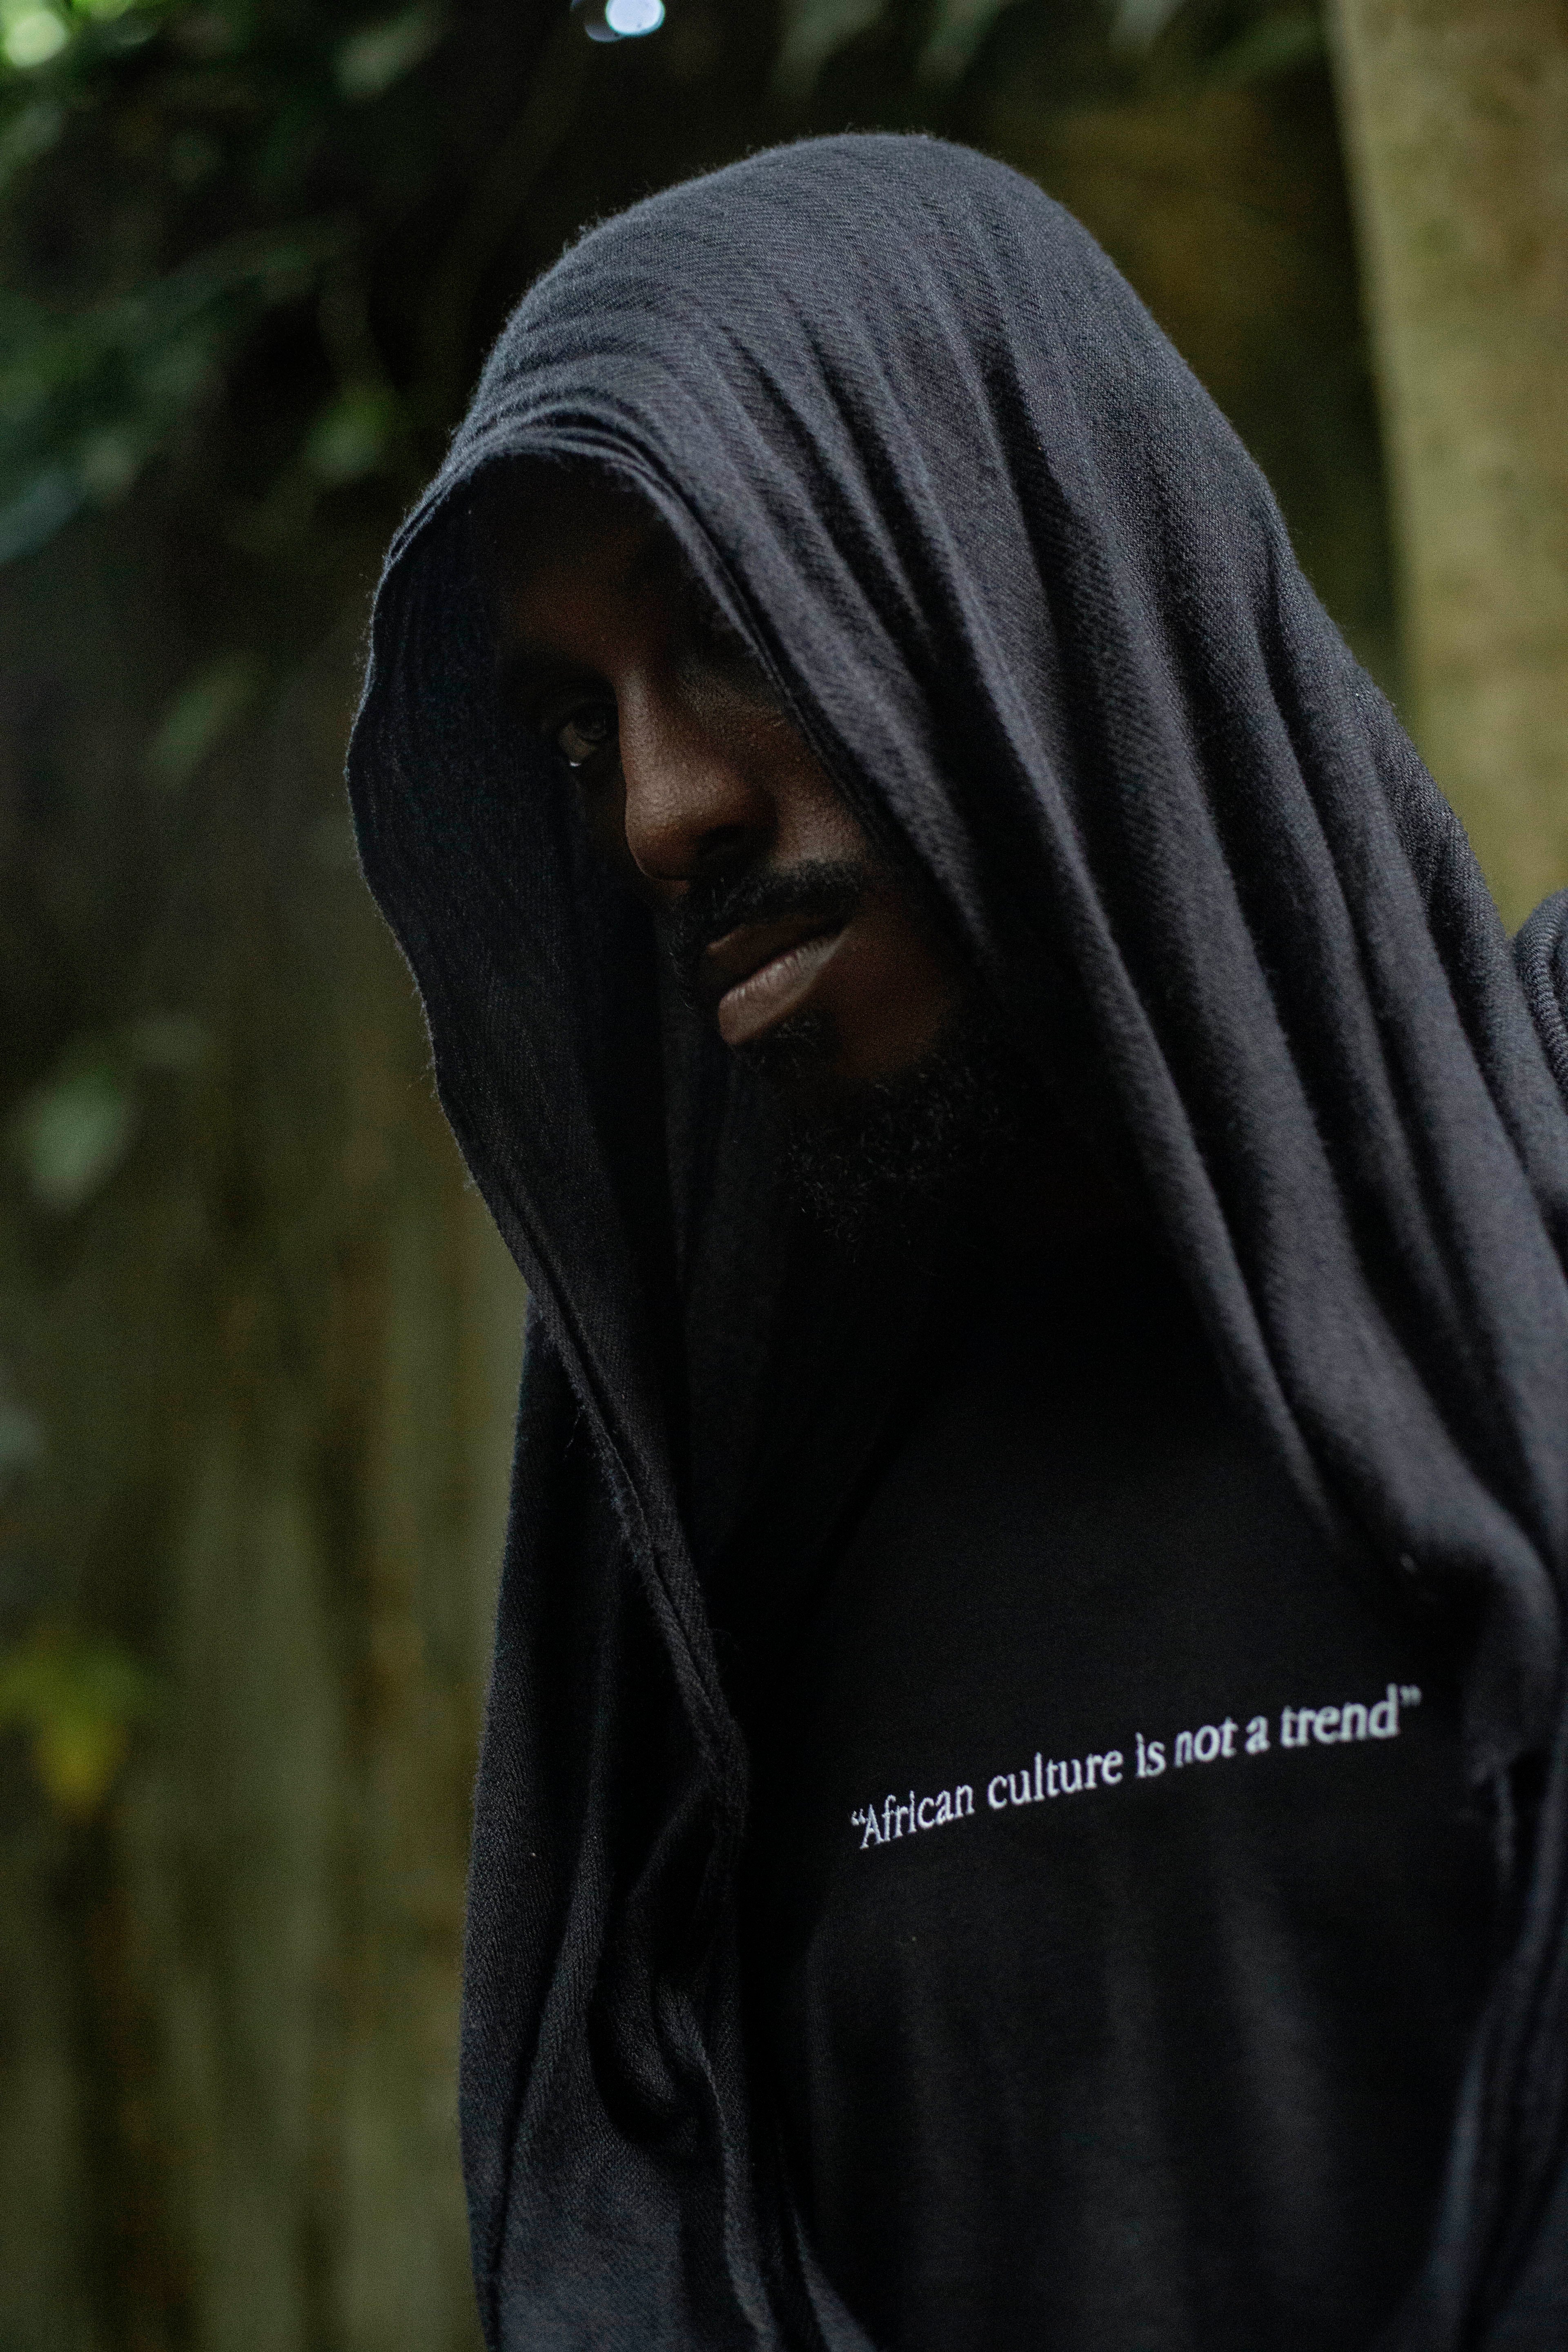 "African Culture is Not a Trend" T-shirt - Black